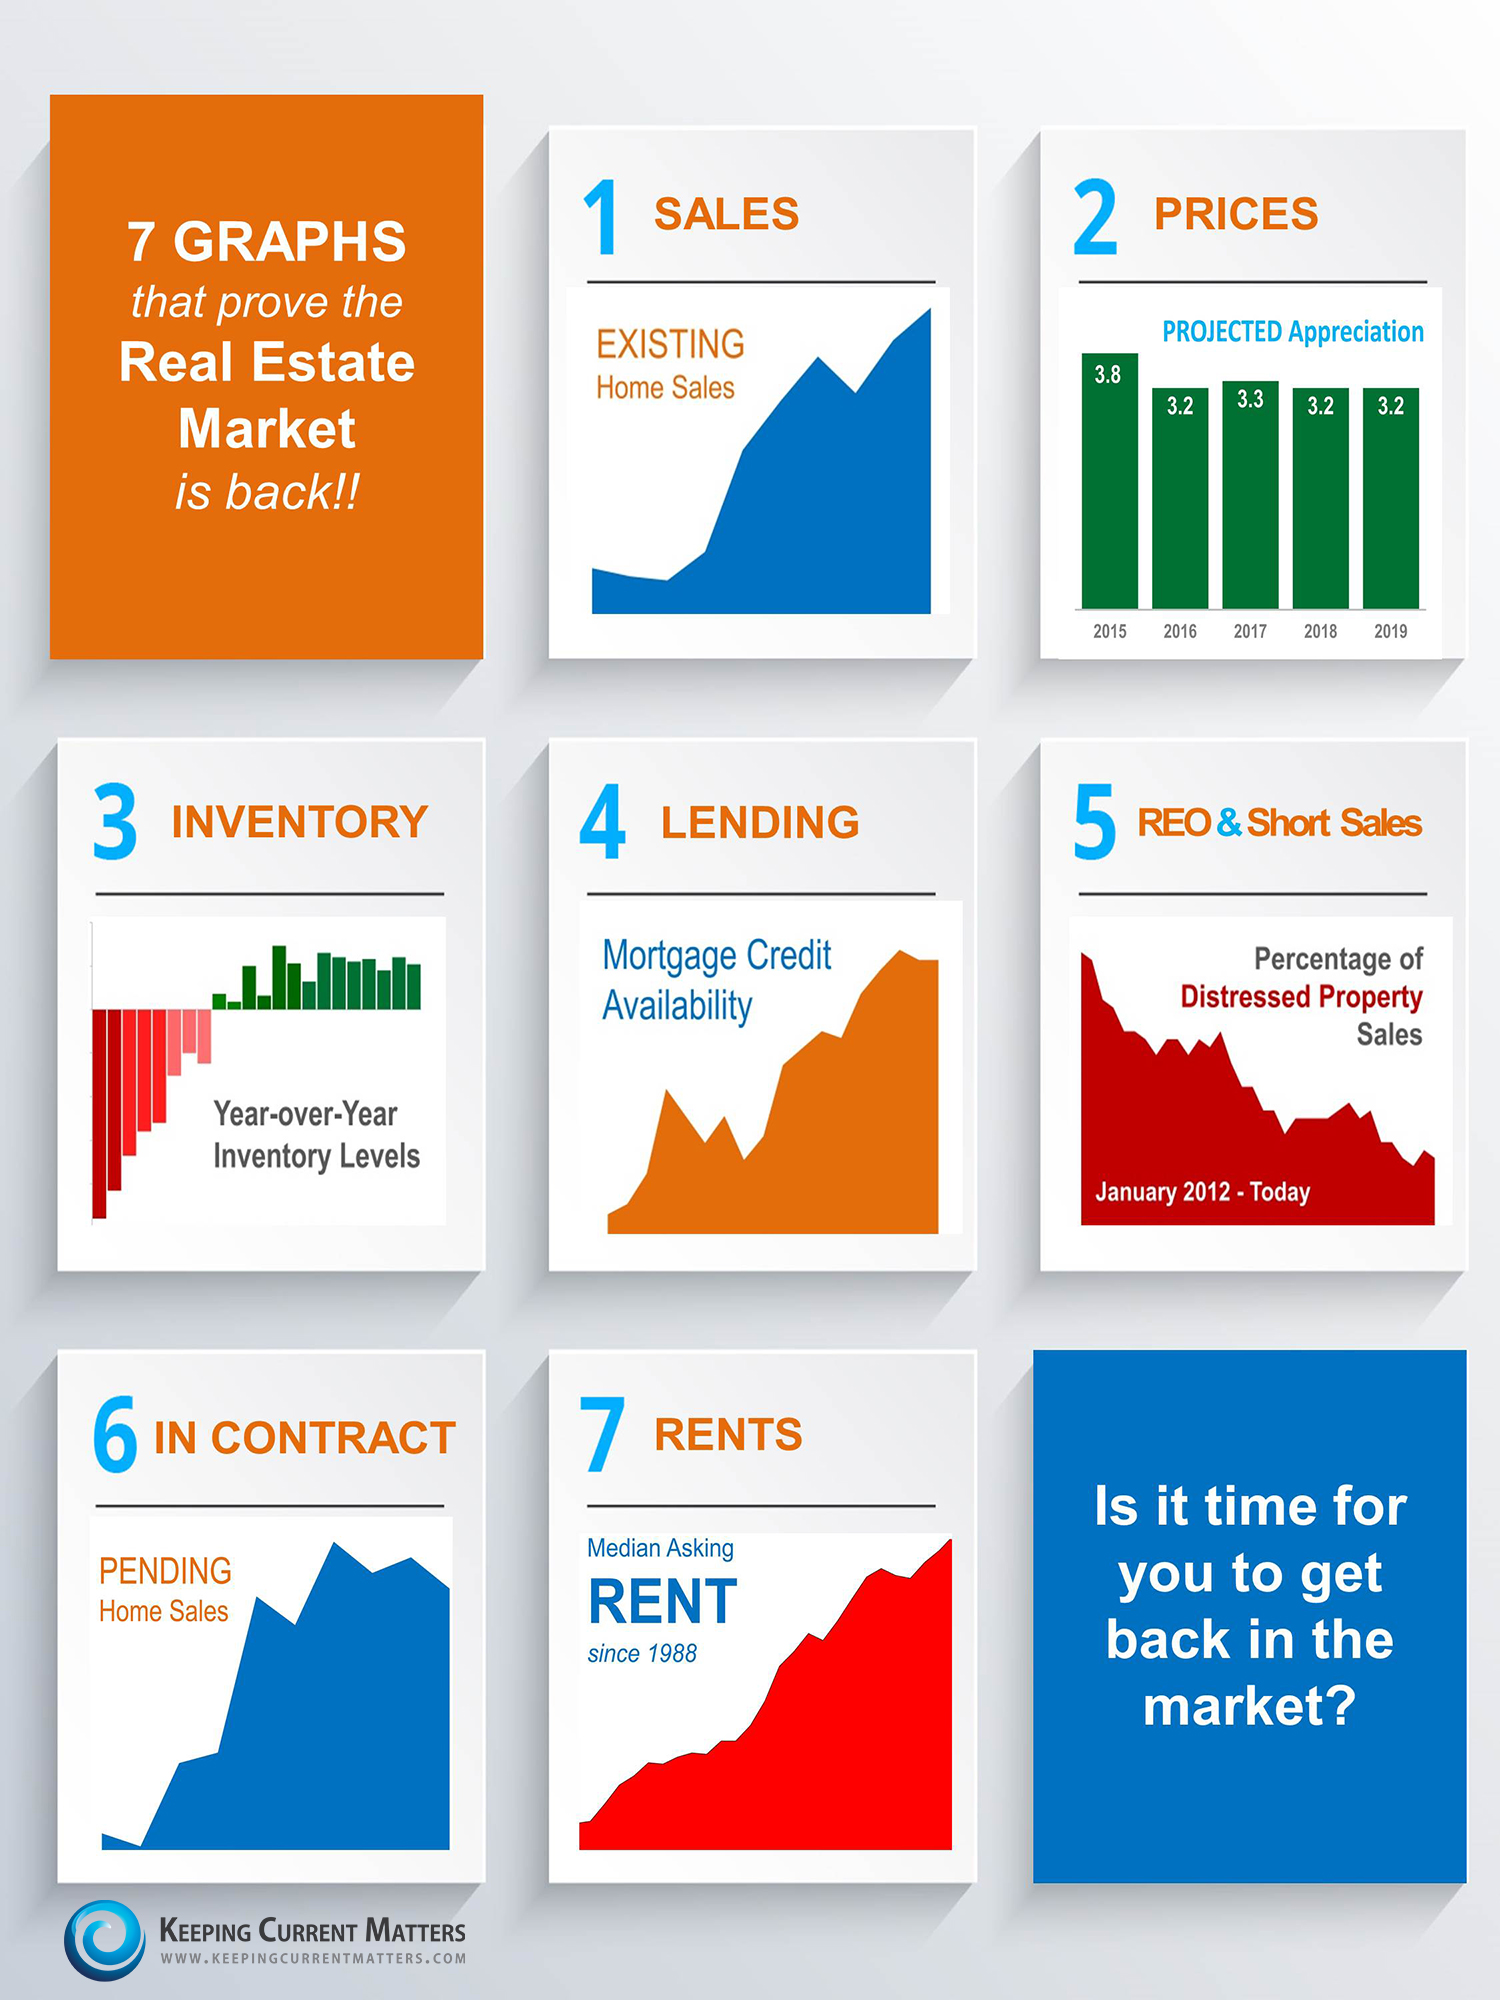 7 Graphs that prove the Real Estate Market is Back! | Keeping Current Matters